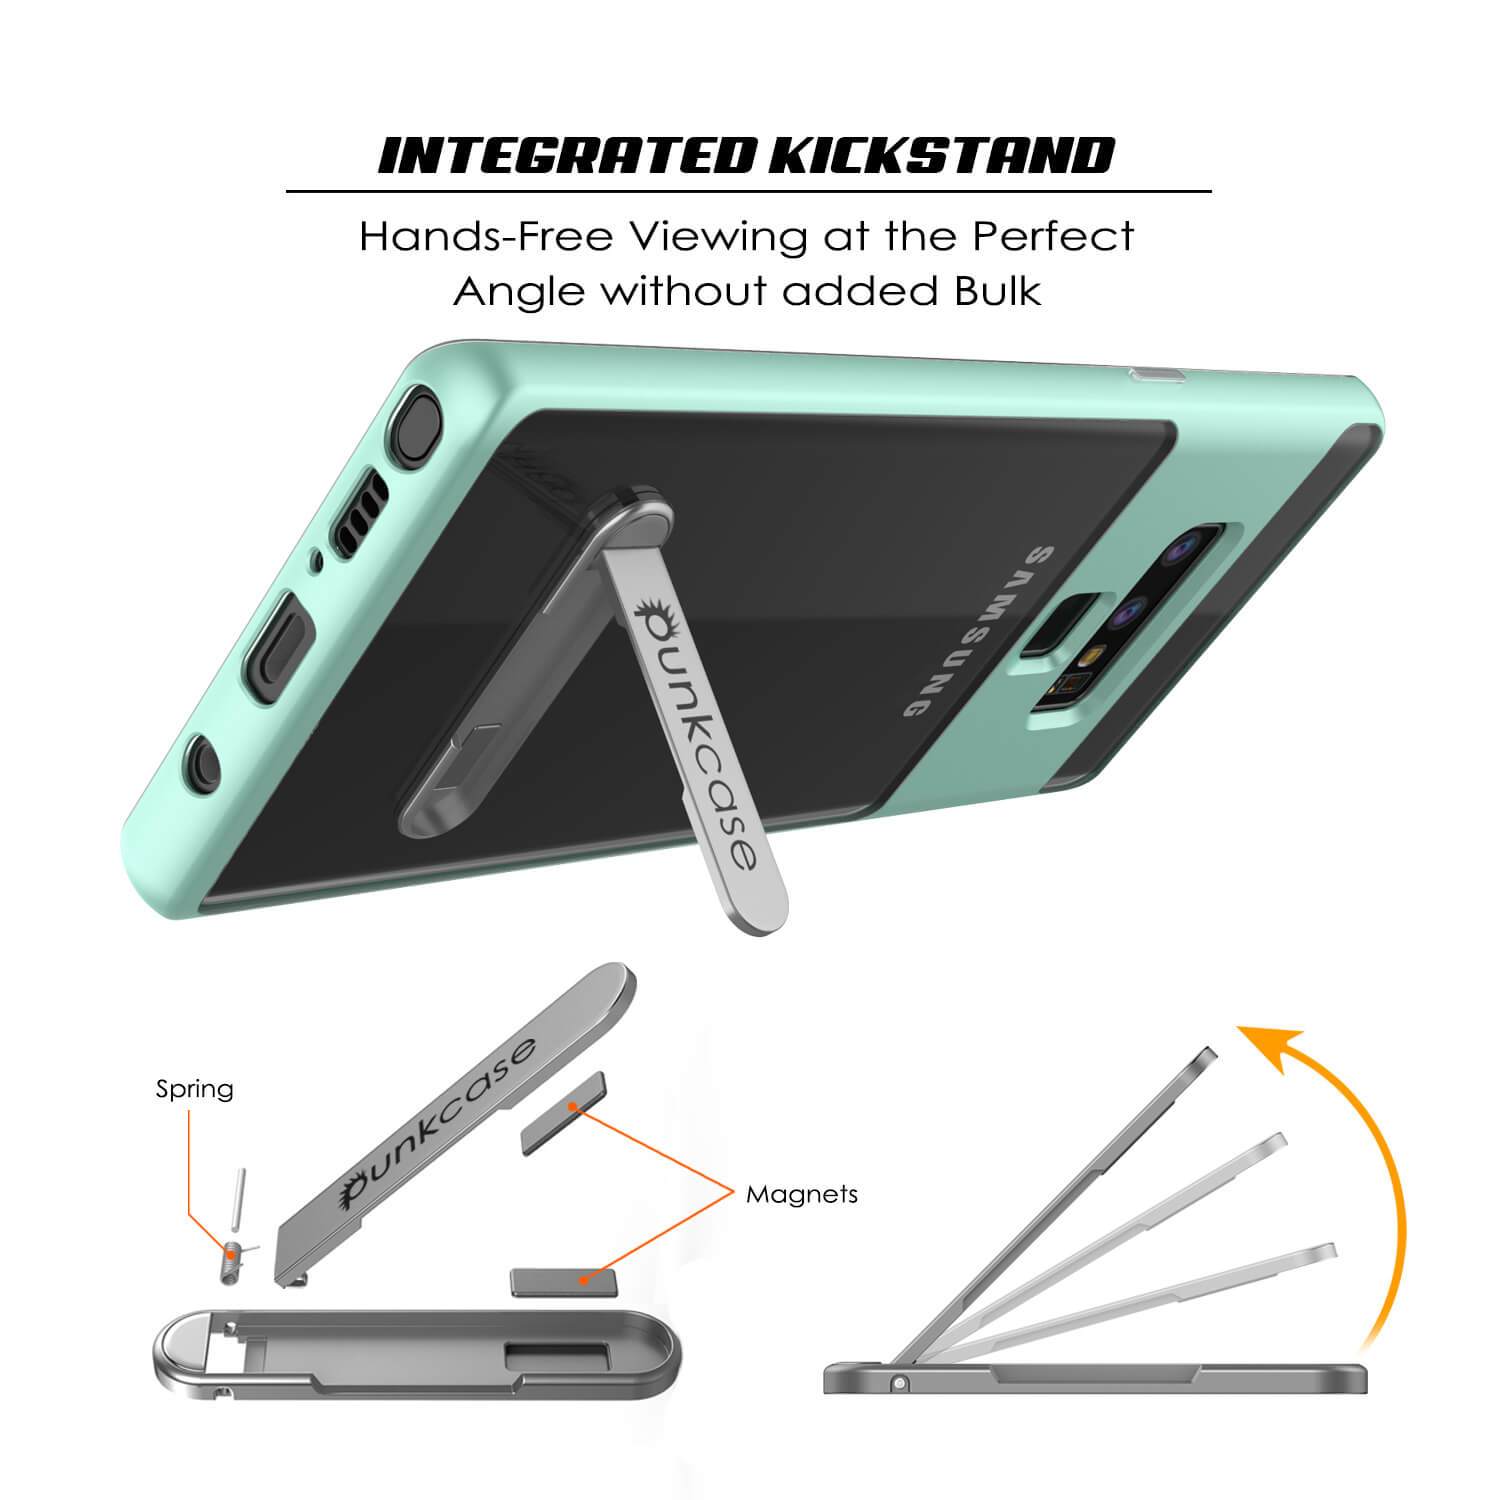 Galaxy Note 9 Lucid 3.0 PunkCase Armor Cover w/Integrated Kickstand and Screen Protector [Teal]